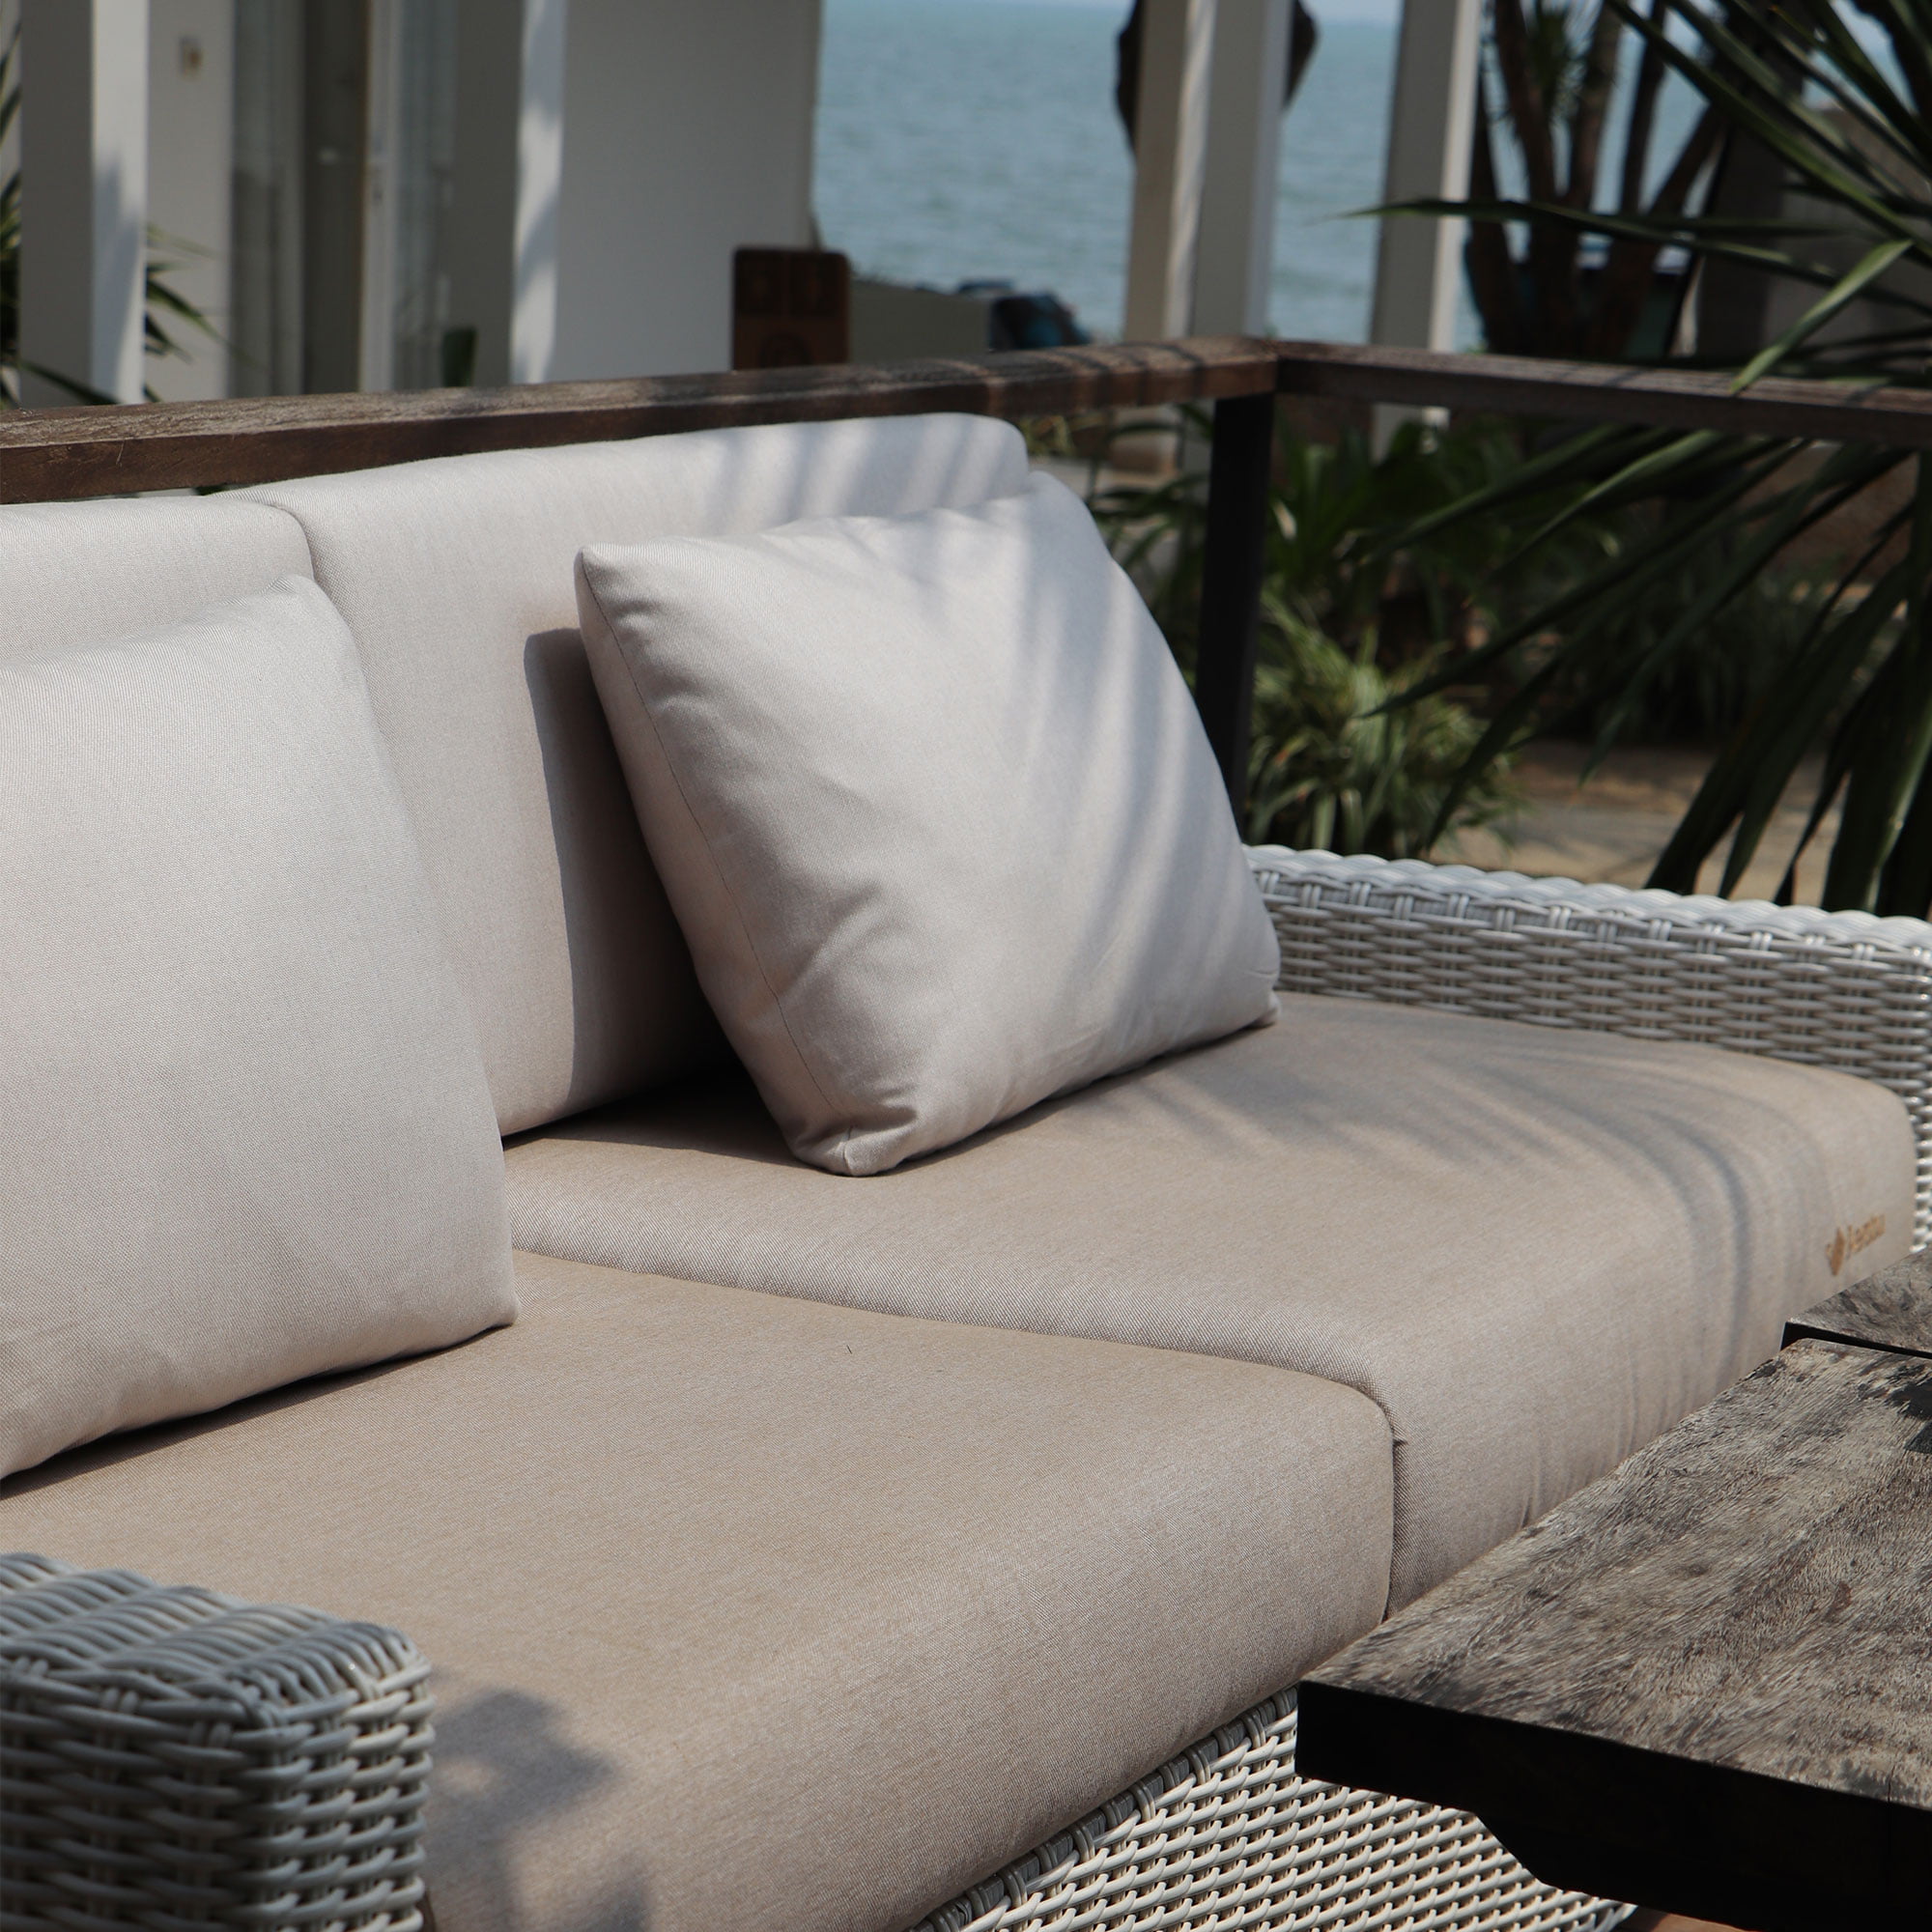 Custom Cushions for Outdoor Furniture: Enhance Your Outdoor Experience